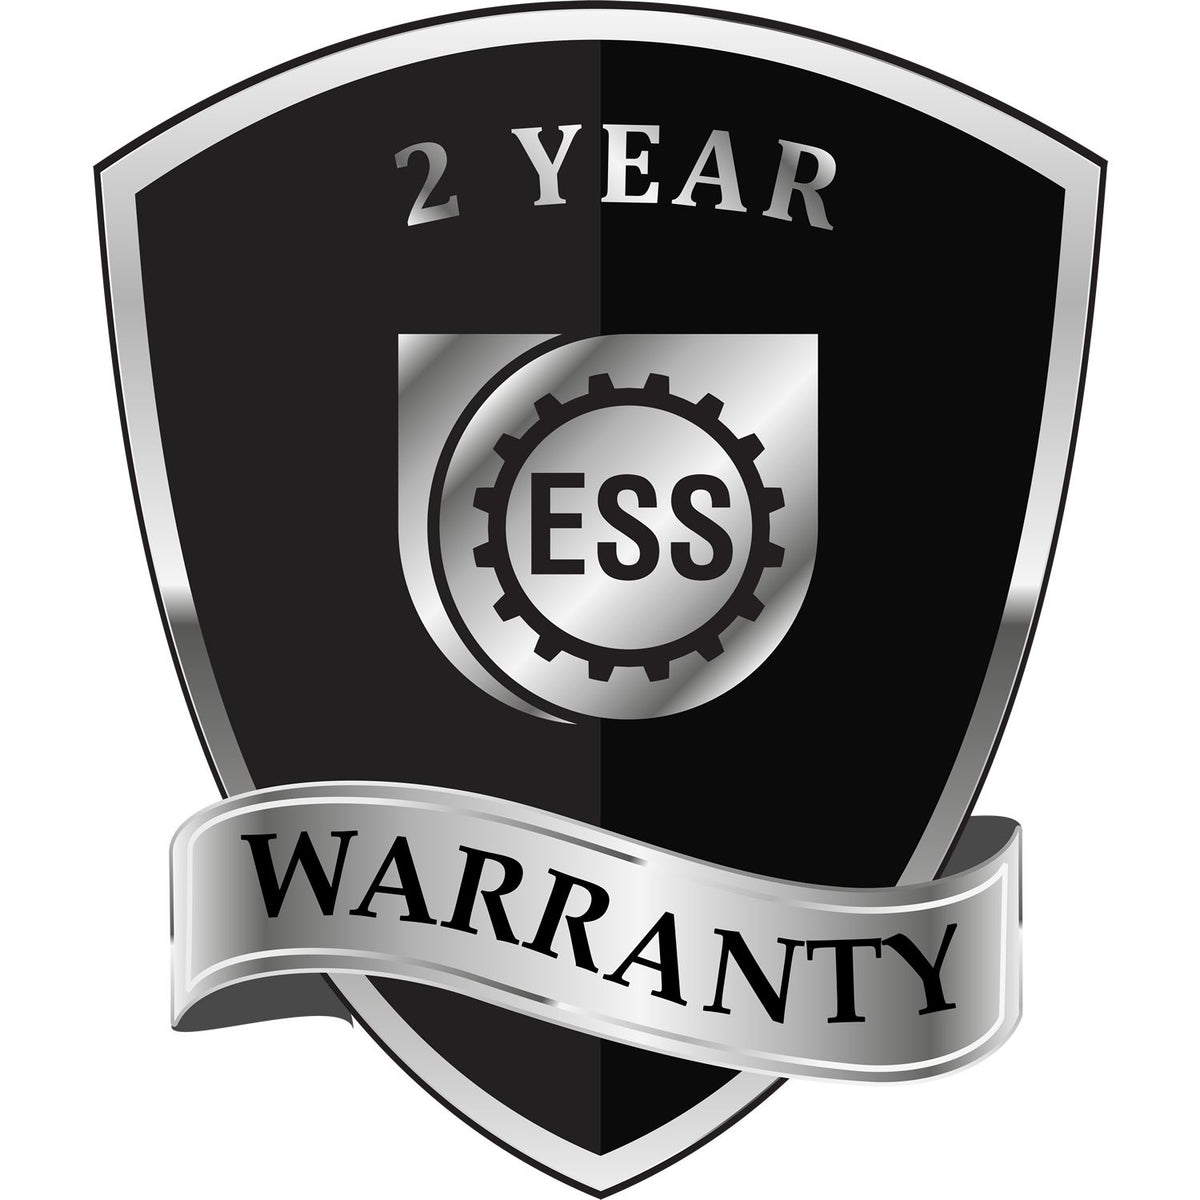 A badge or emblem showing a warranty icon for the Heavy Duty Cast Iron Hawaii Engineer Seal Embosser